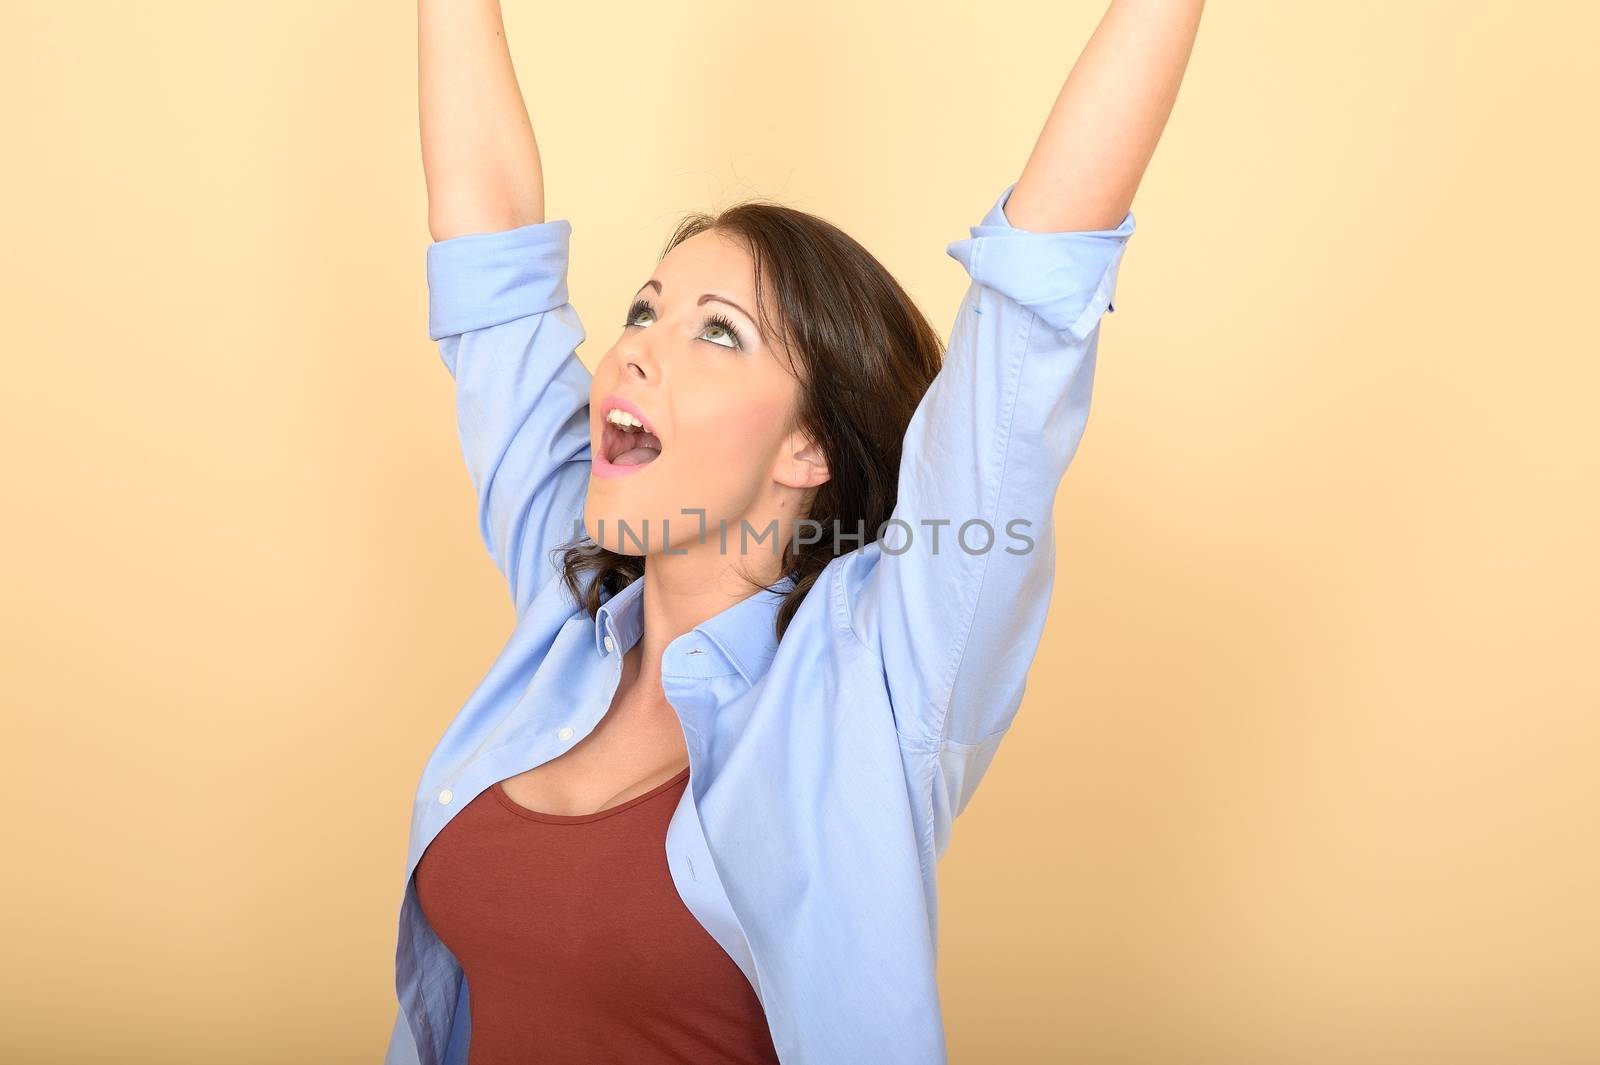 Attractive Young Woman Sitting on the Floor Wearing a Blue Shirt and White Jeans Raising Her Hands in Excitement